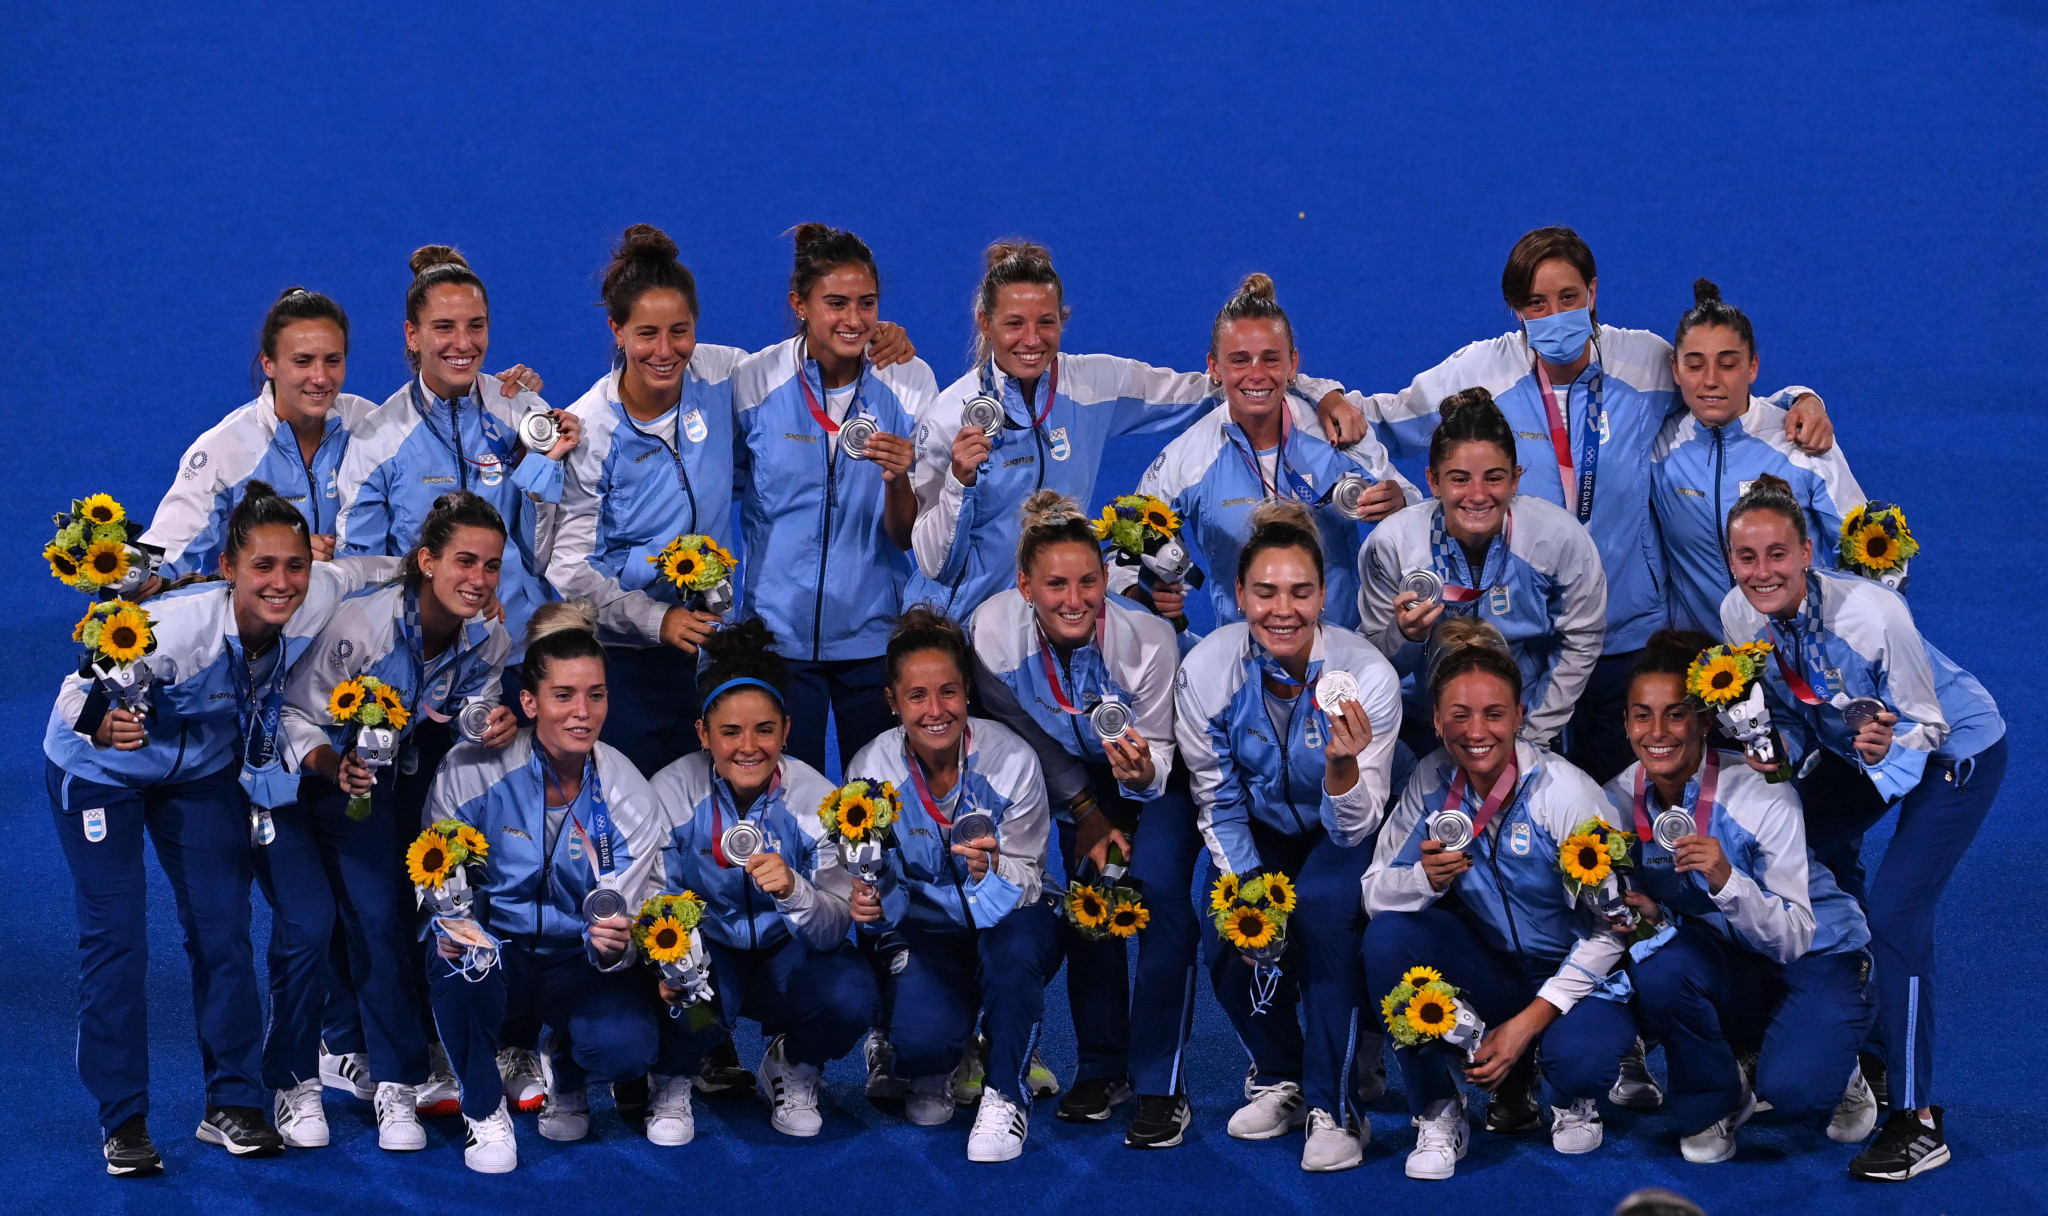 Argentina's women reached the hockey final before taking silver at Tokyo 2020 in the country's best perforemance of the Olympics ©Getty Images 